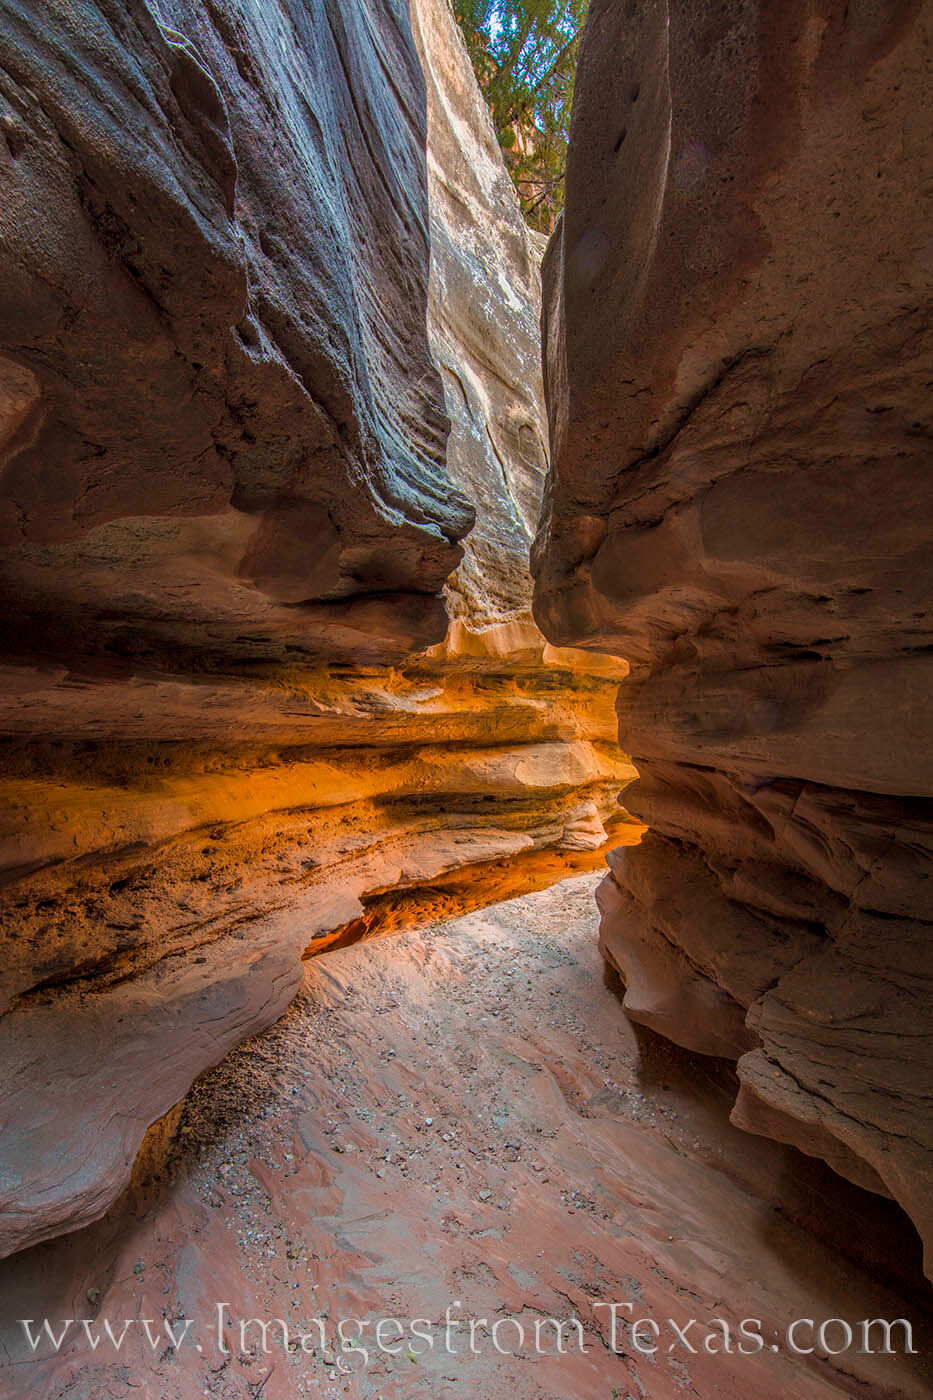 A wamr glow awaits around the corner in this portion of this slot canyon. Called the Llano Slot Canyons, also known as Central...